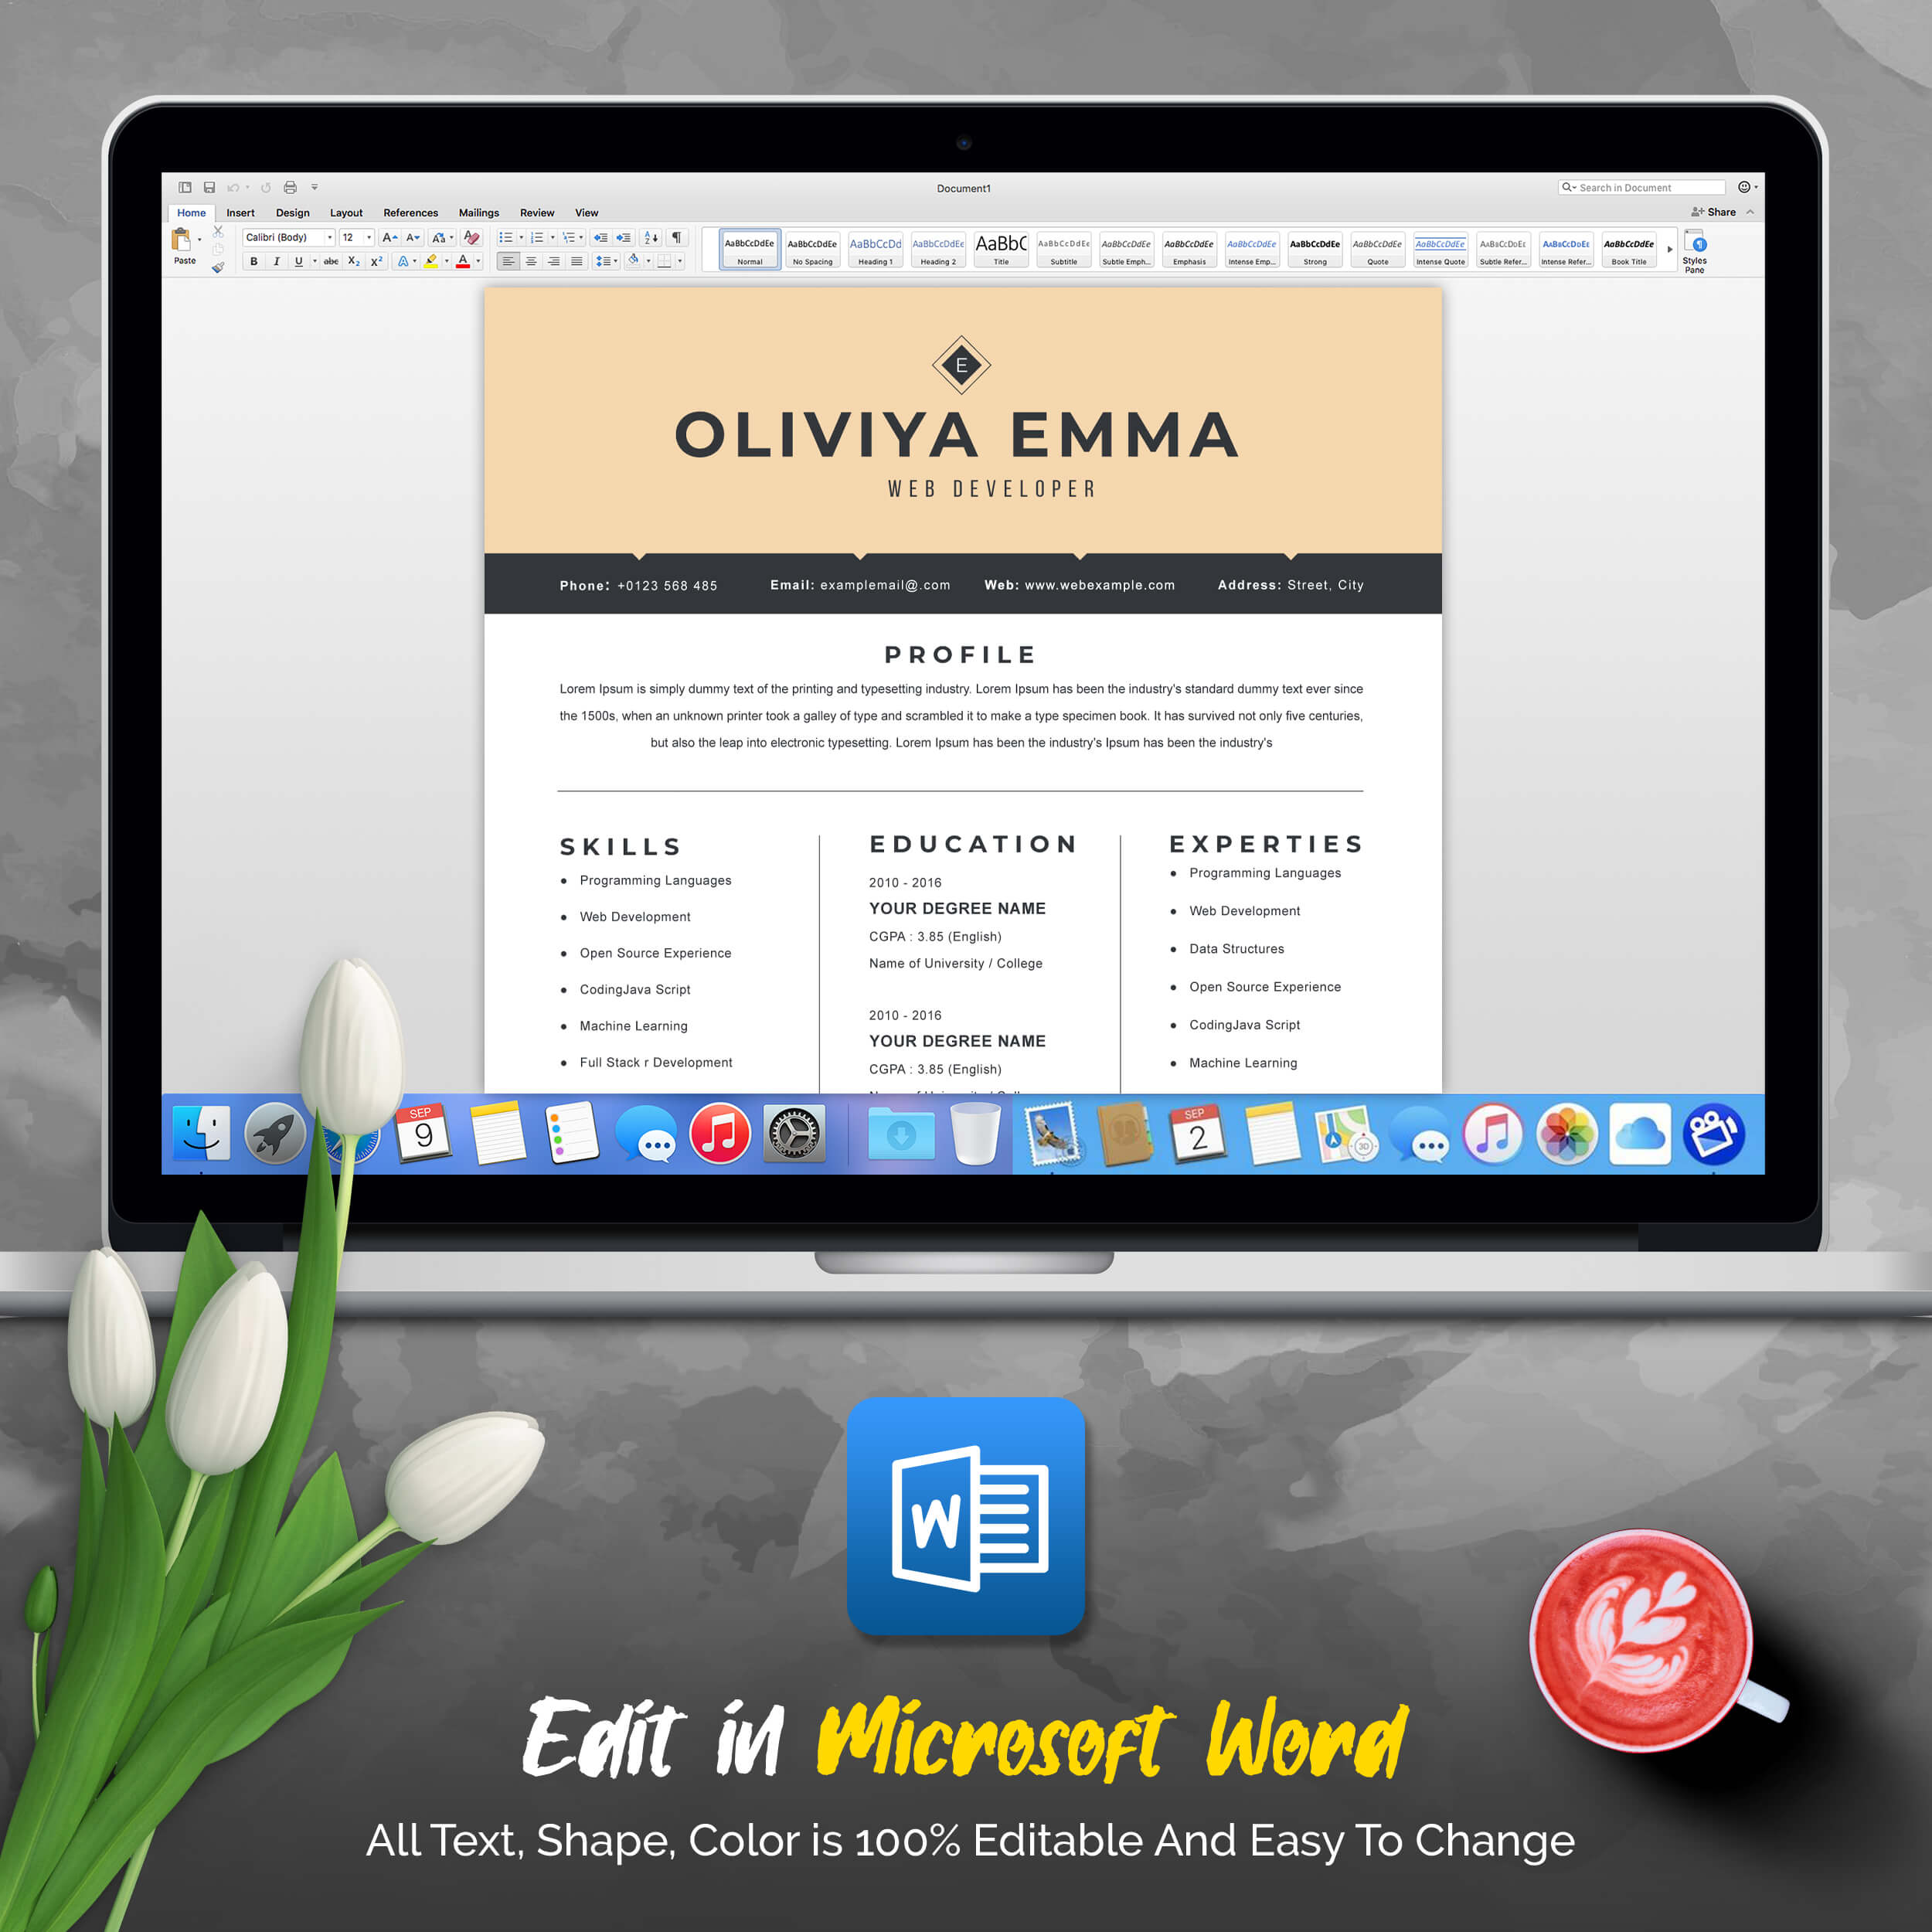 04 3 pages professional ms word aple pages eps photoshop psd resume cv design template design by resume inventor 1 111